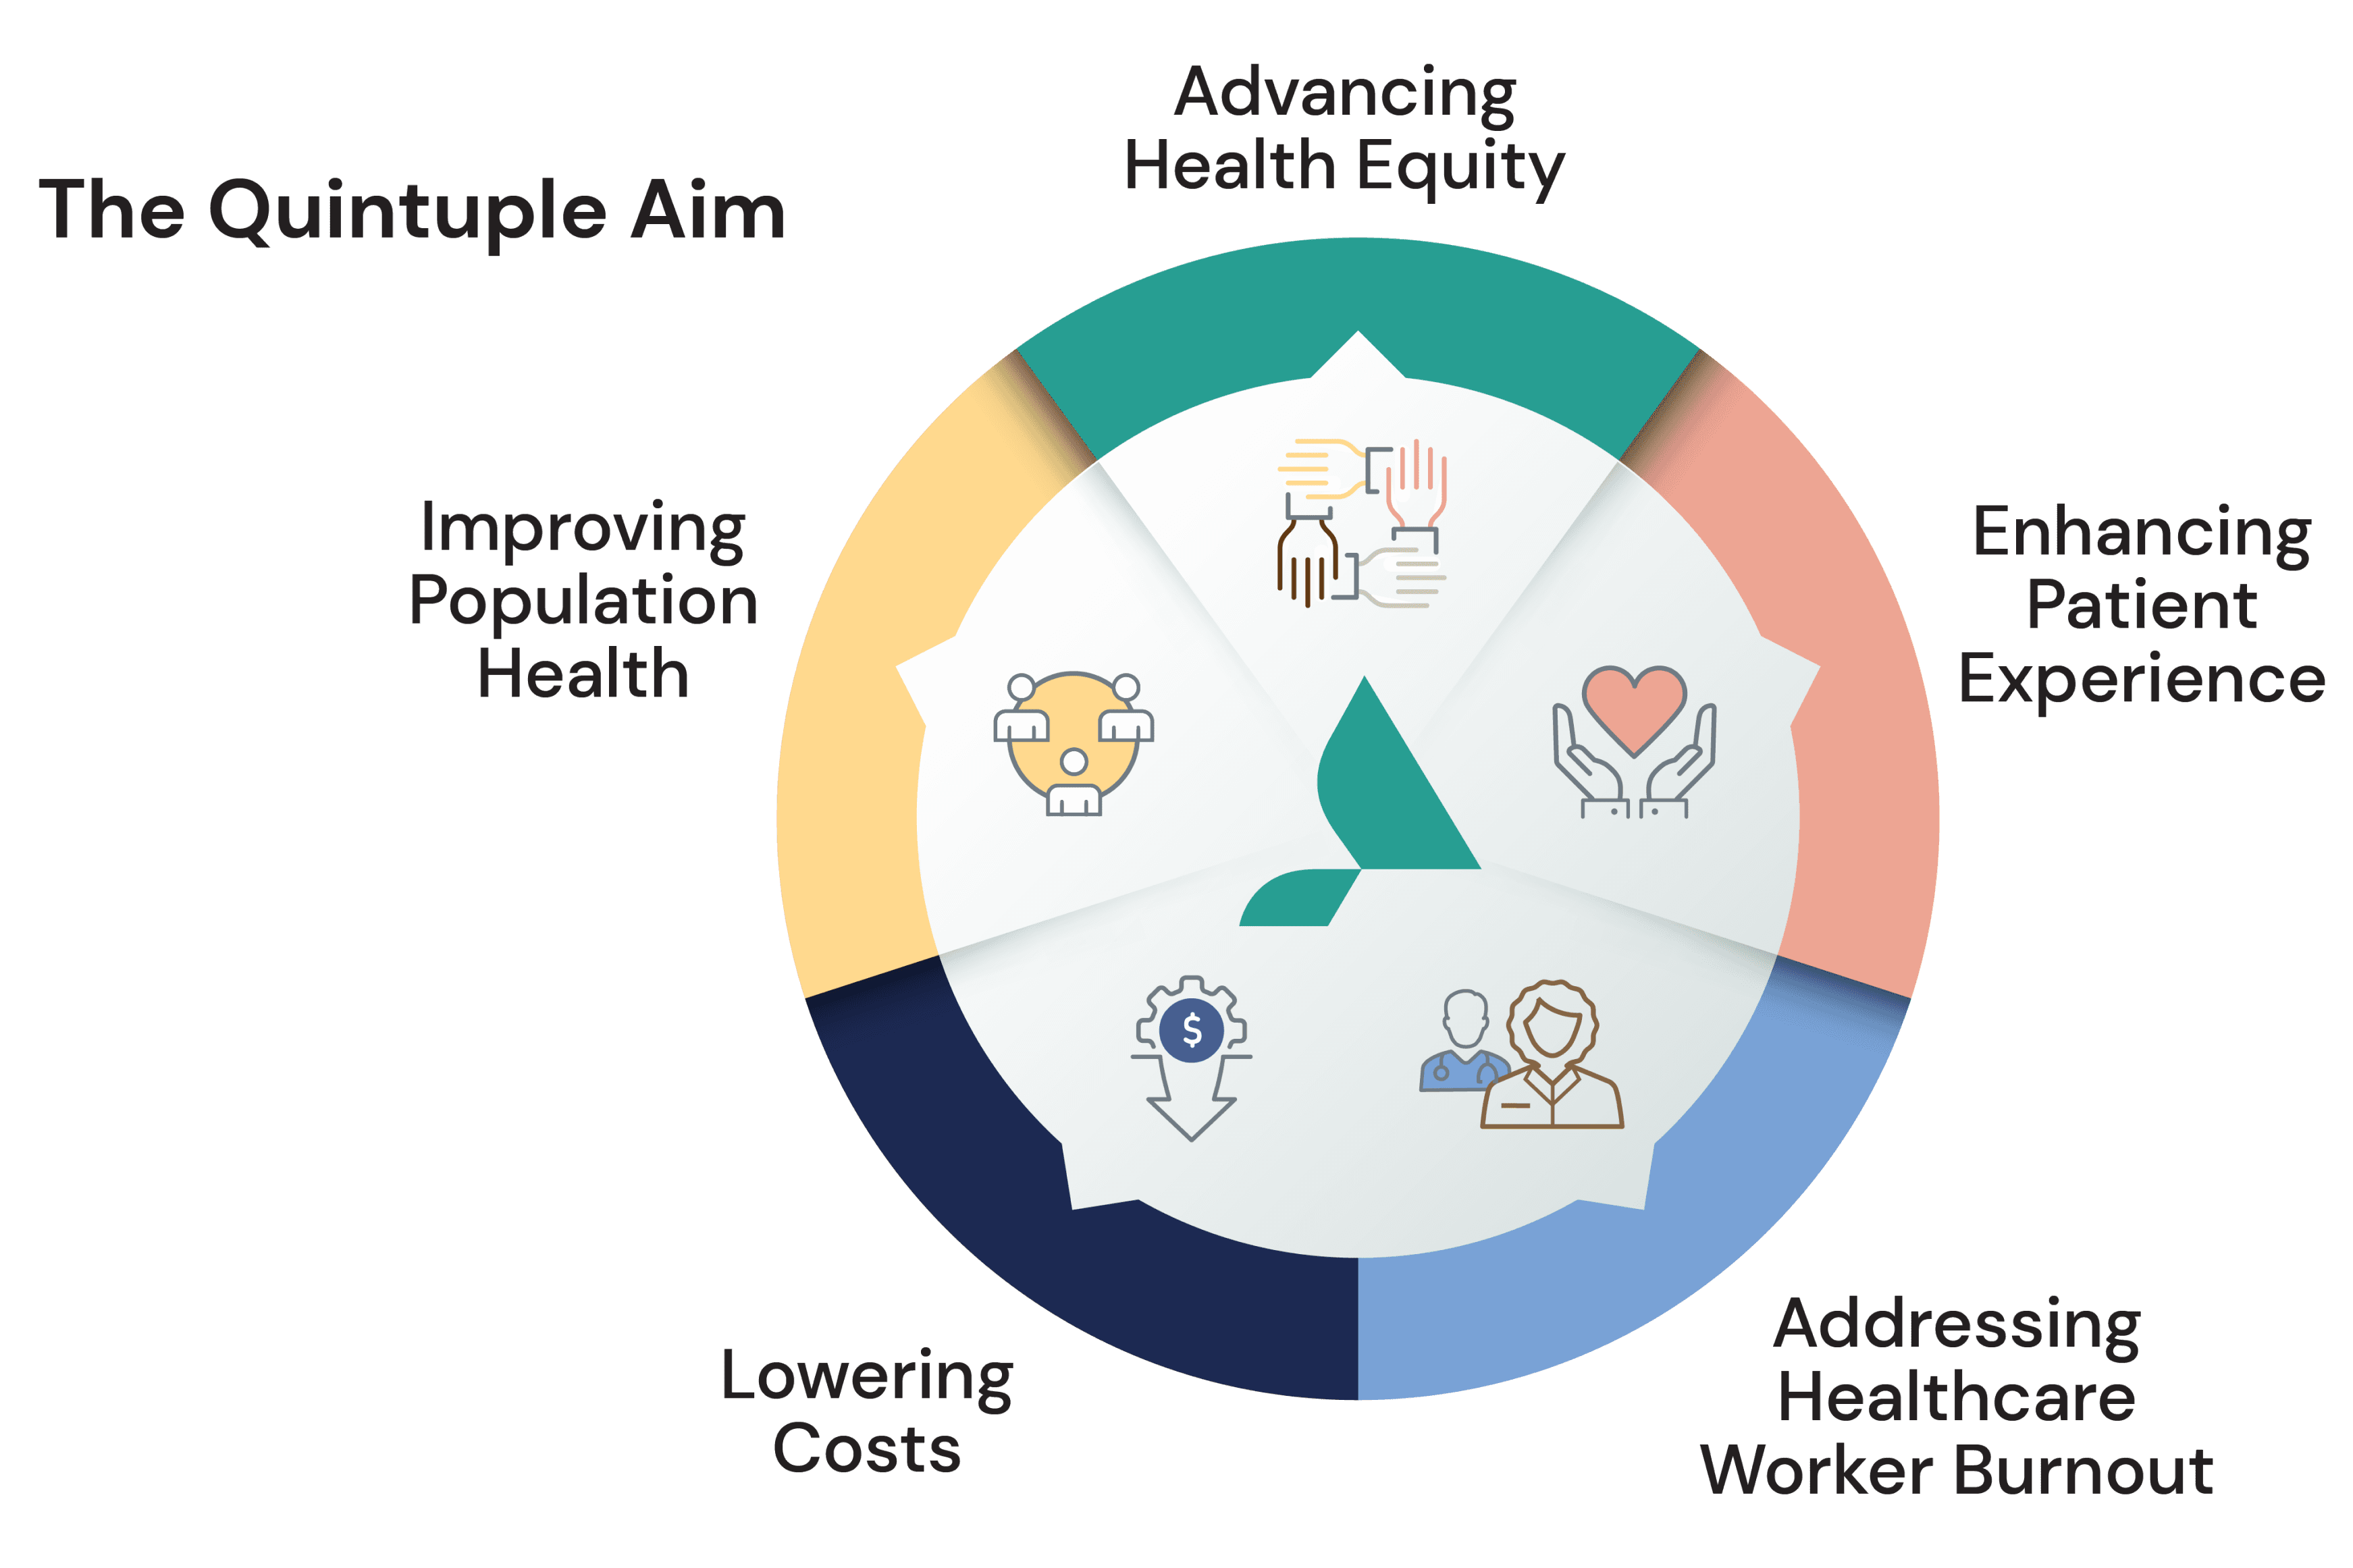 Diagram outlining the Quintuple Aim for Healthcare of Advancing Health Equity, Enhancing Patient Experience, Addressing Healthcare Worker Burnout, Lowering Costs, Improving Population Health.